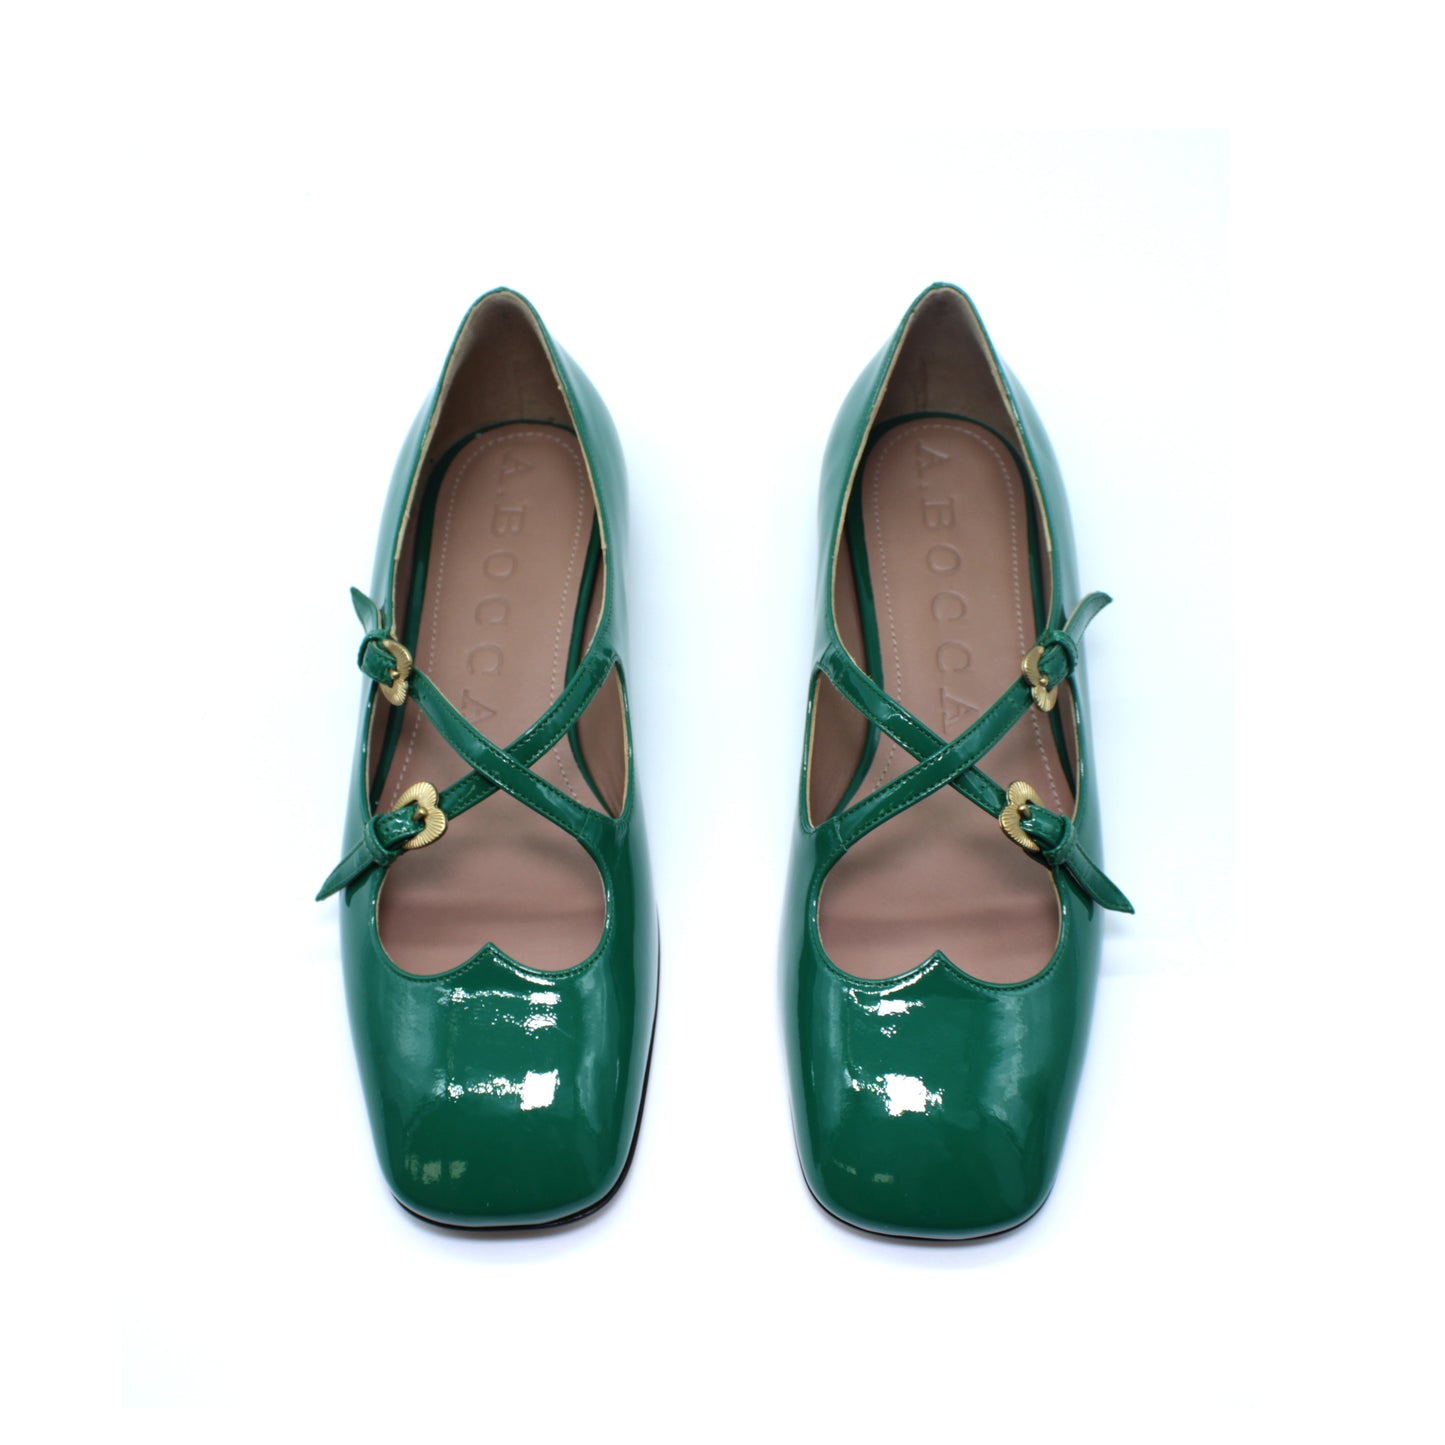 Ballerina Two for Love in forest-coloured patent leather